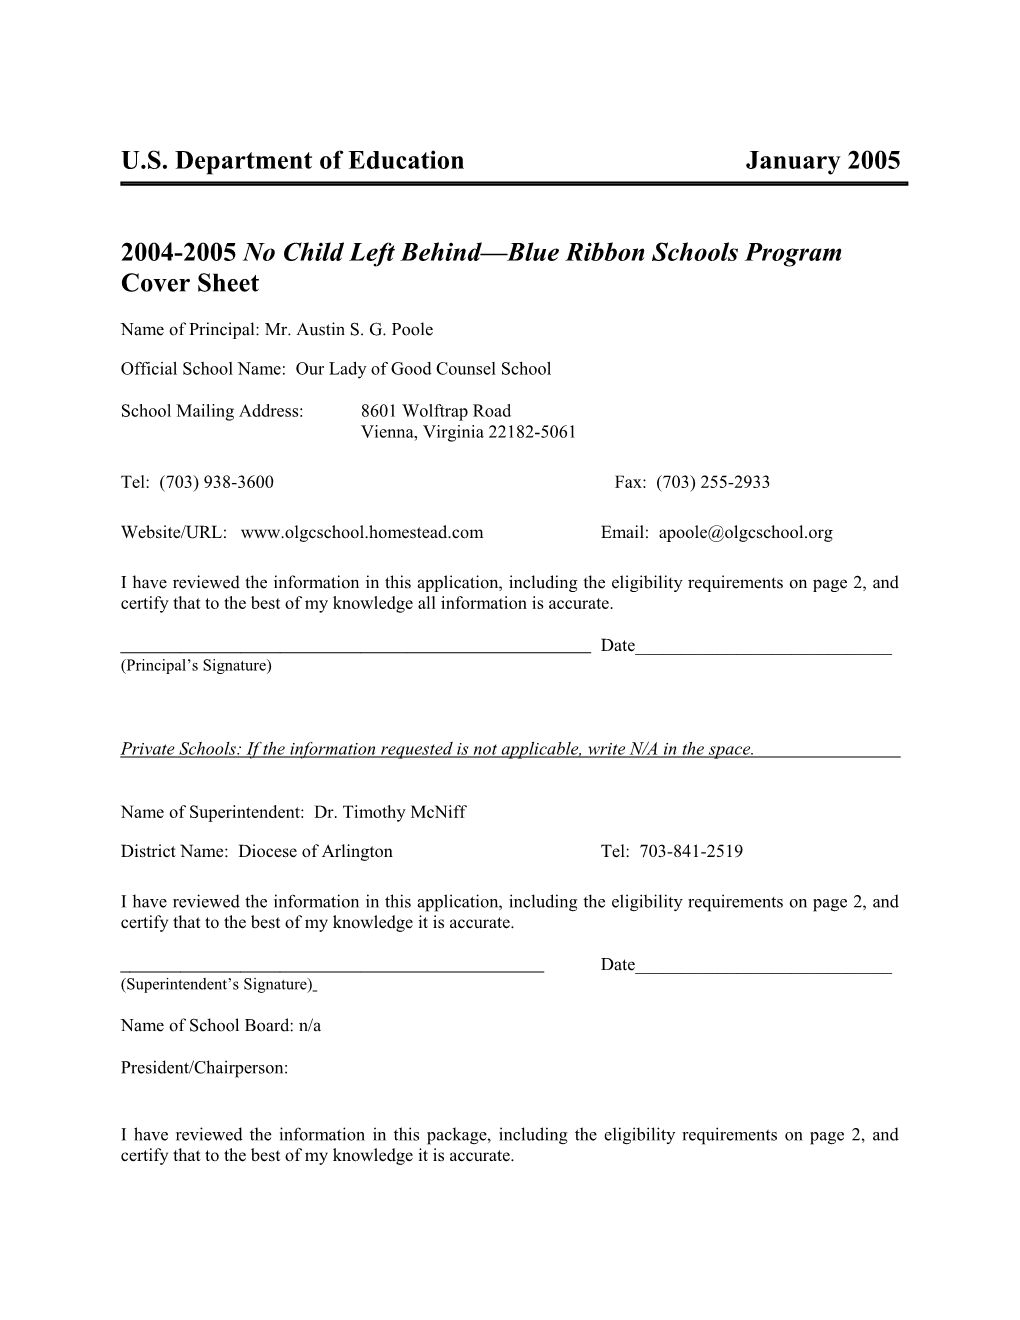 Our Lady of Good Counsel School Application: 2004-2005, No Child Left Behind - Blue Ribbon